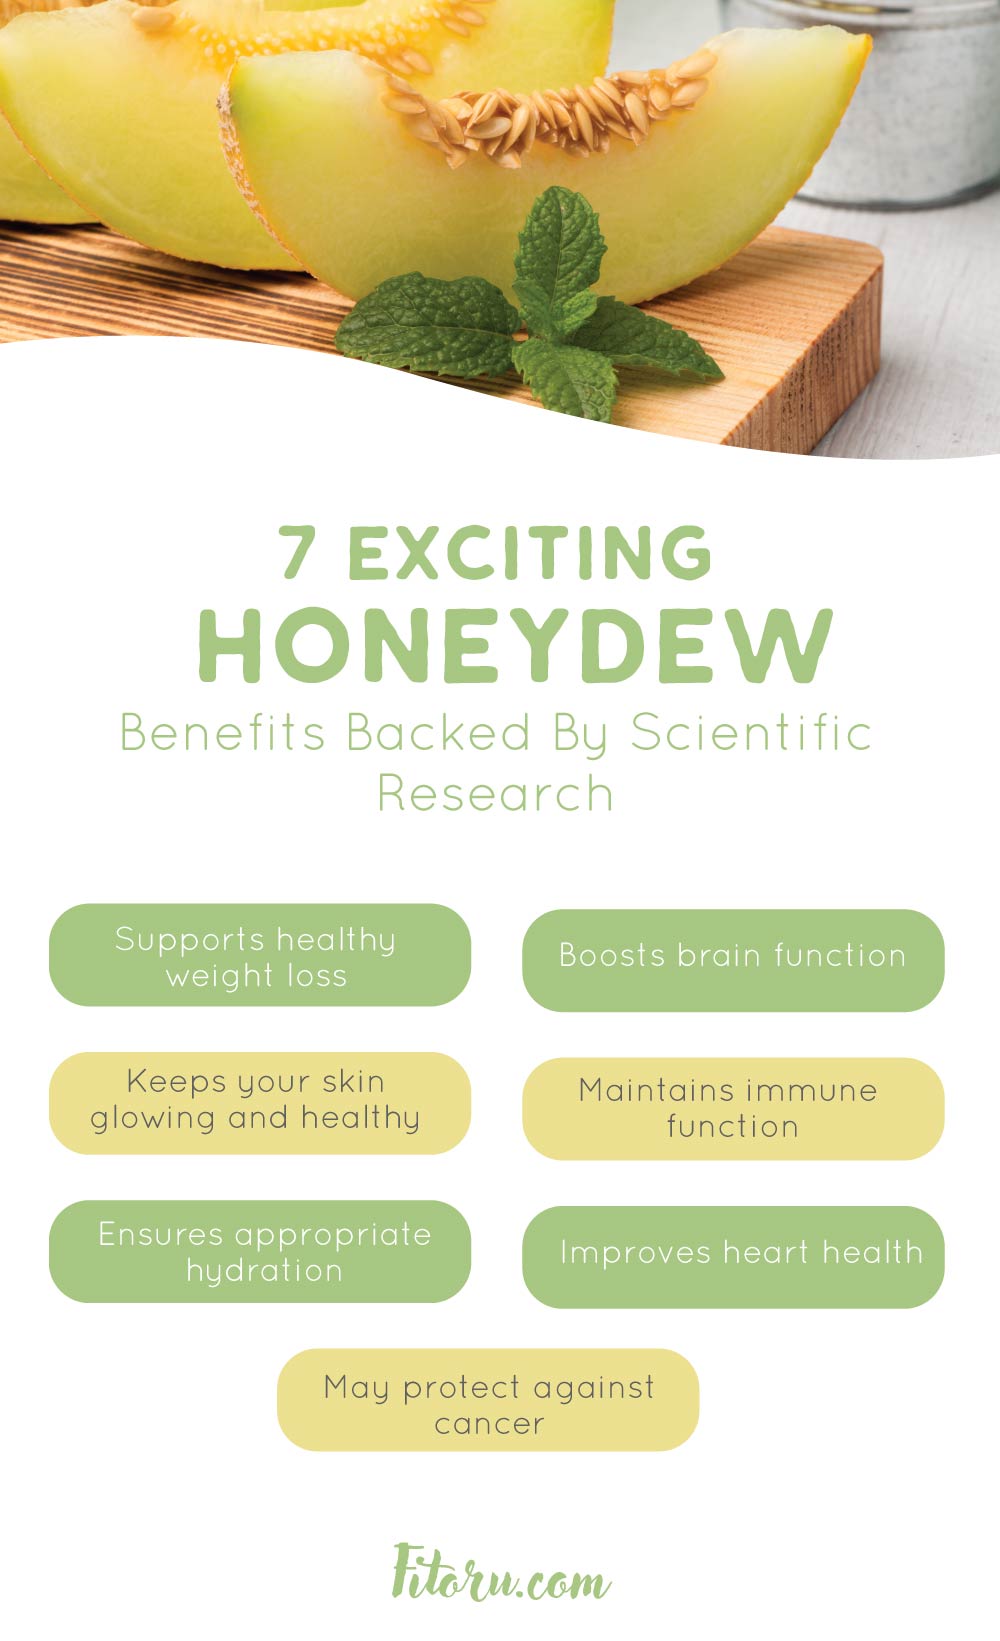 Exciting Honeydew Benefits Backed By Scientific Research